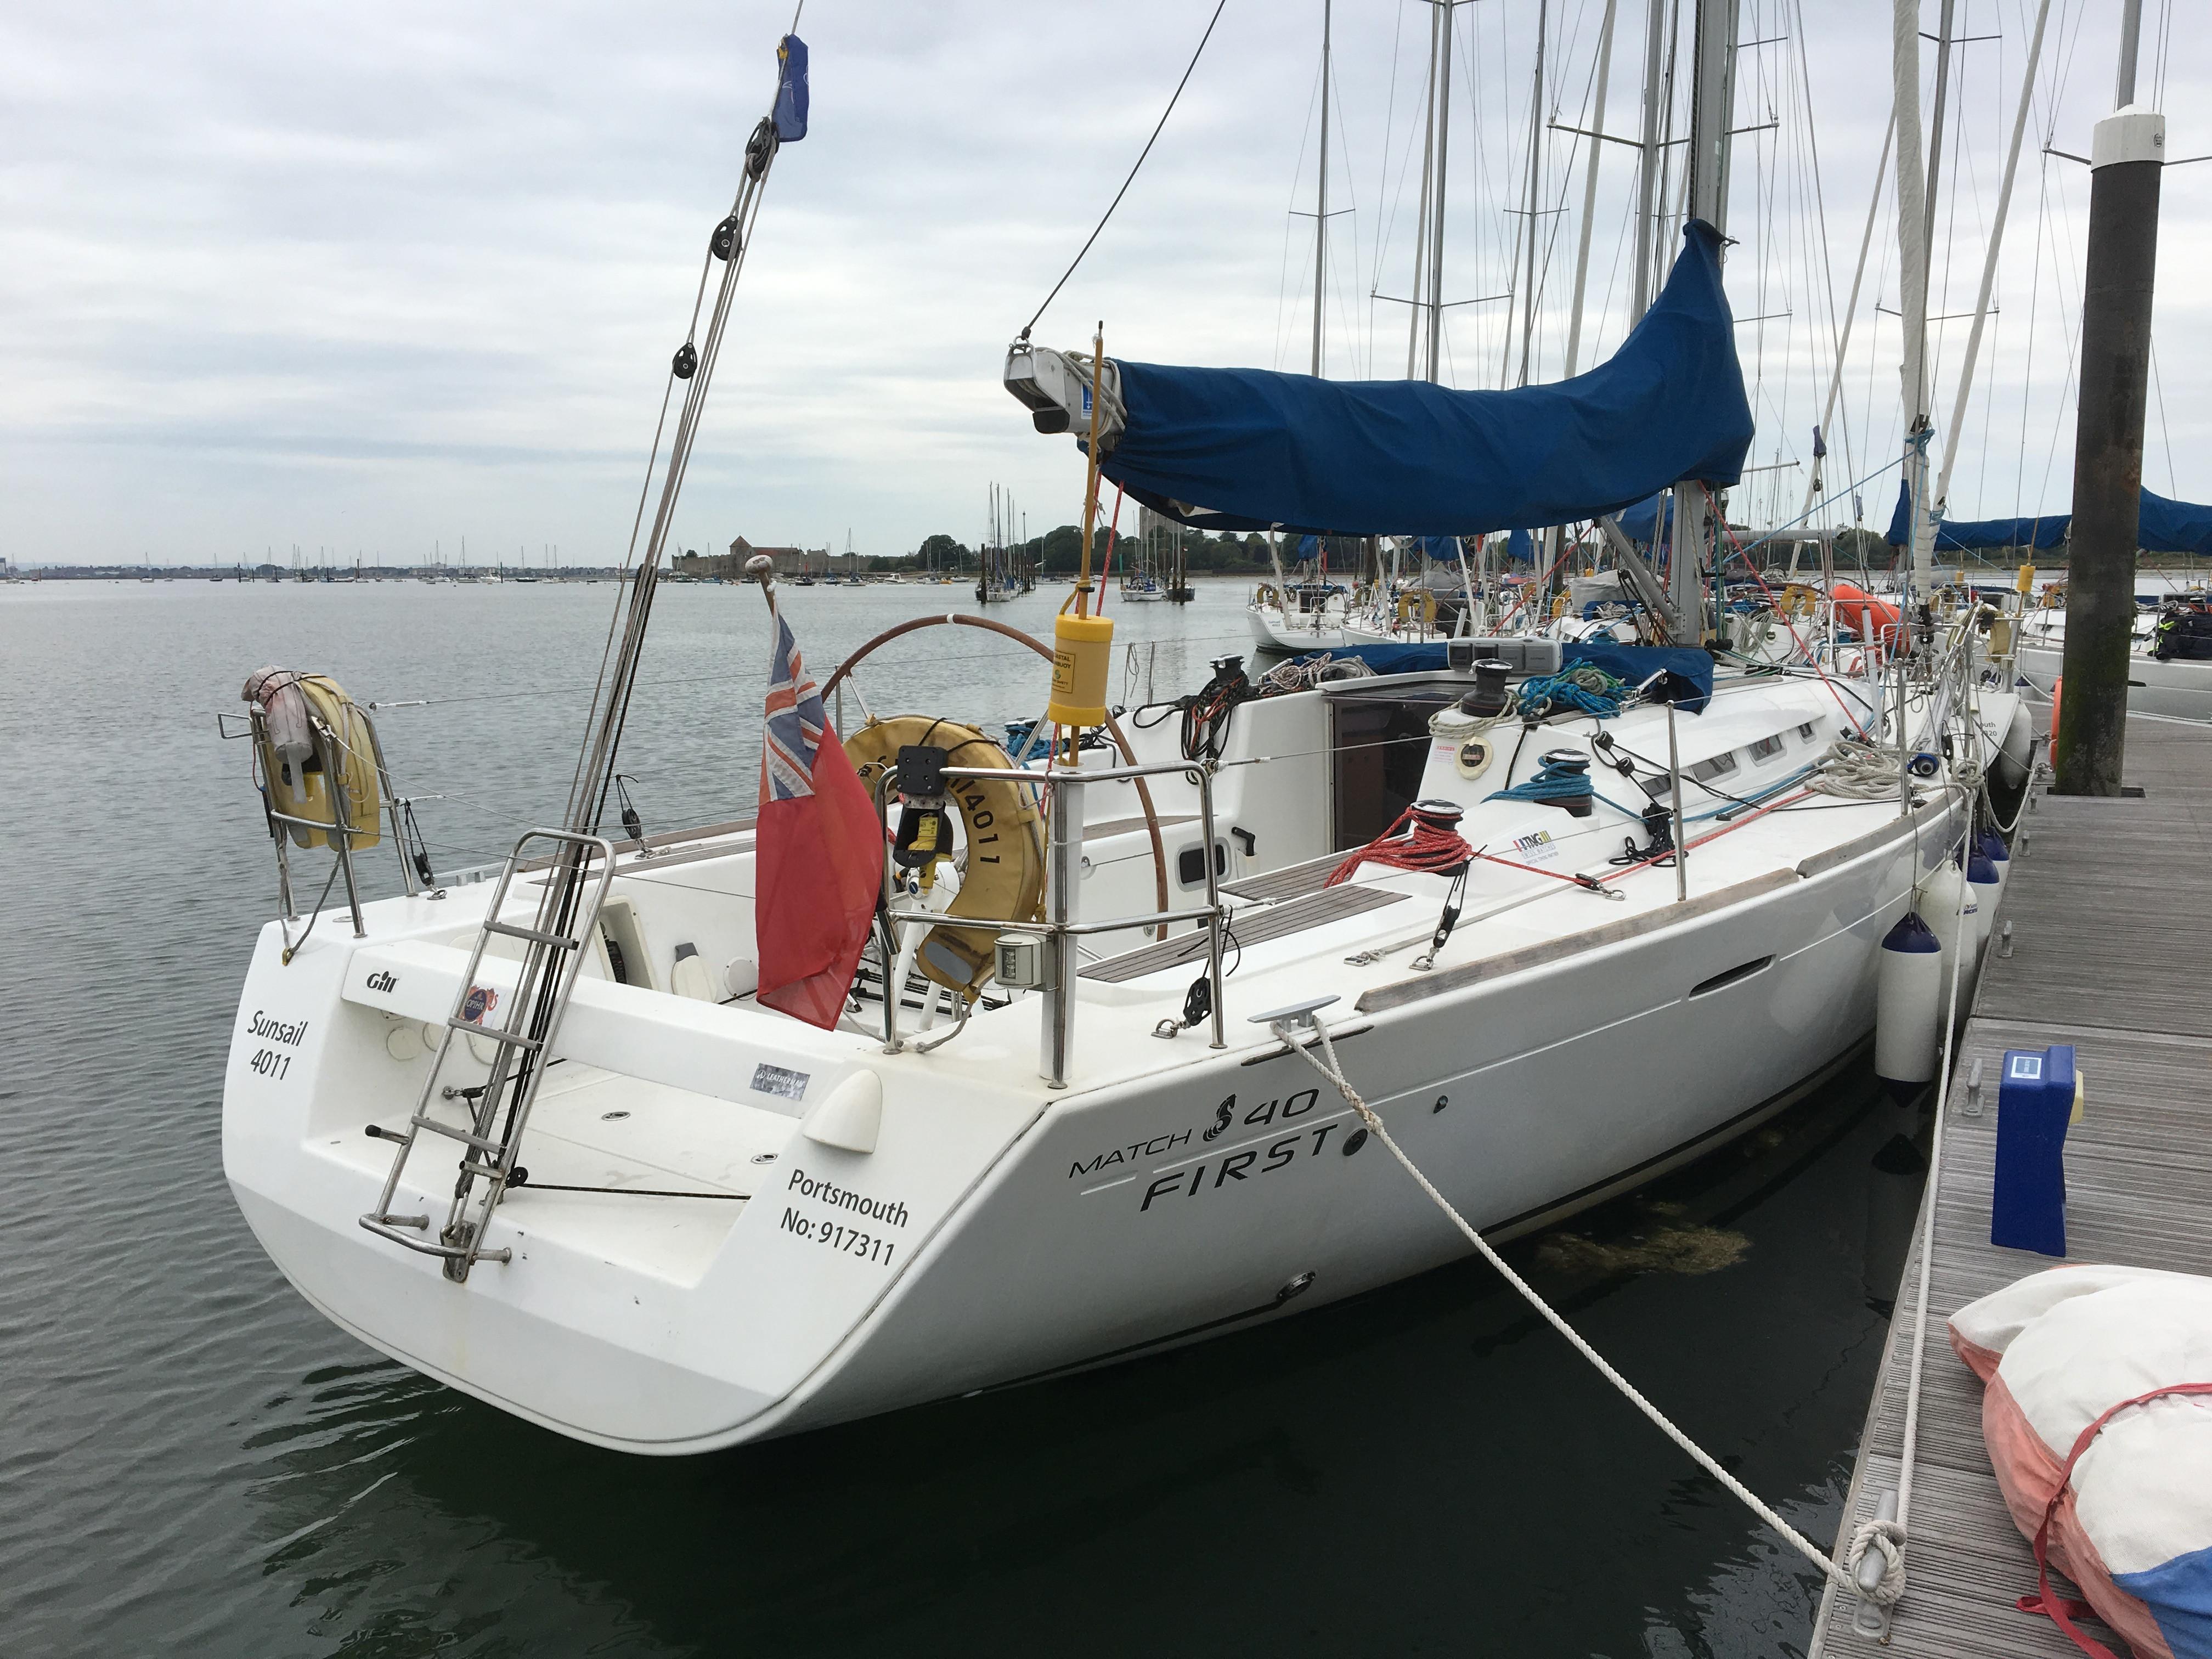 monohull sailboats for sale